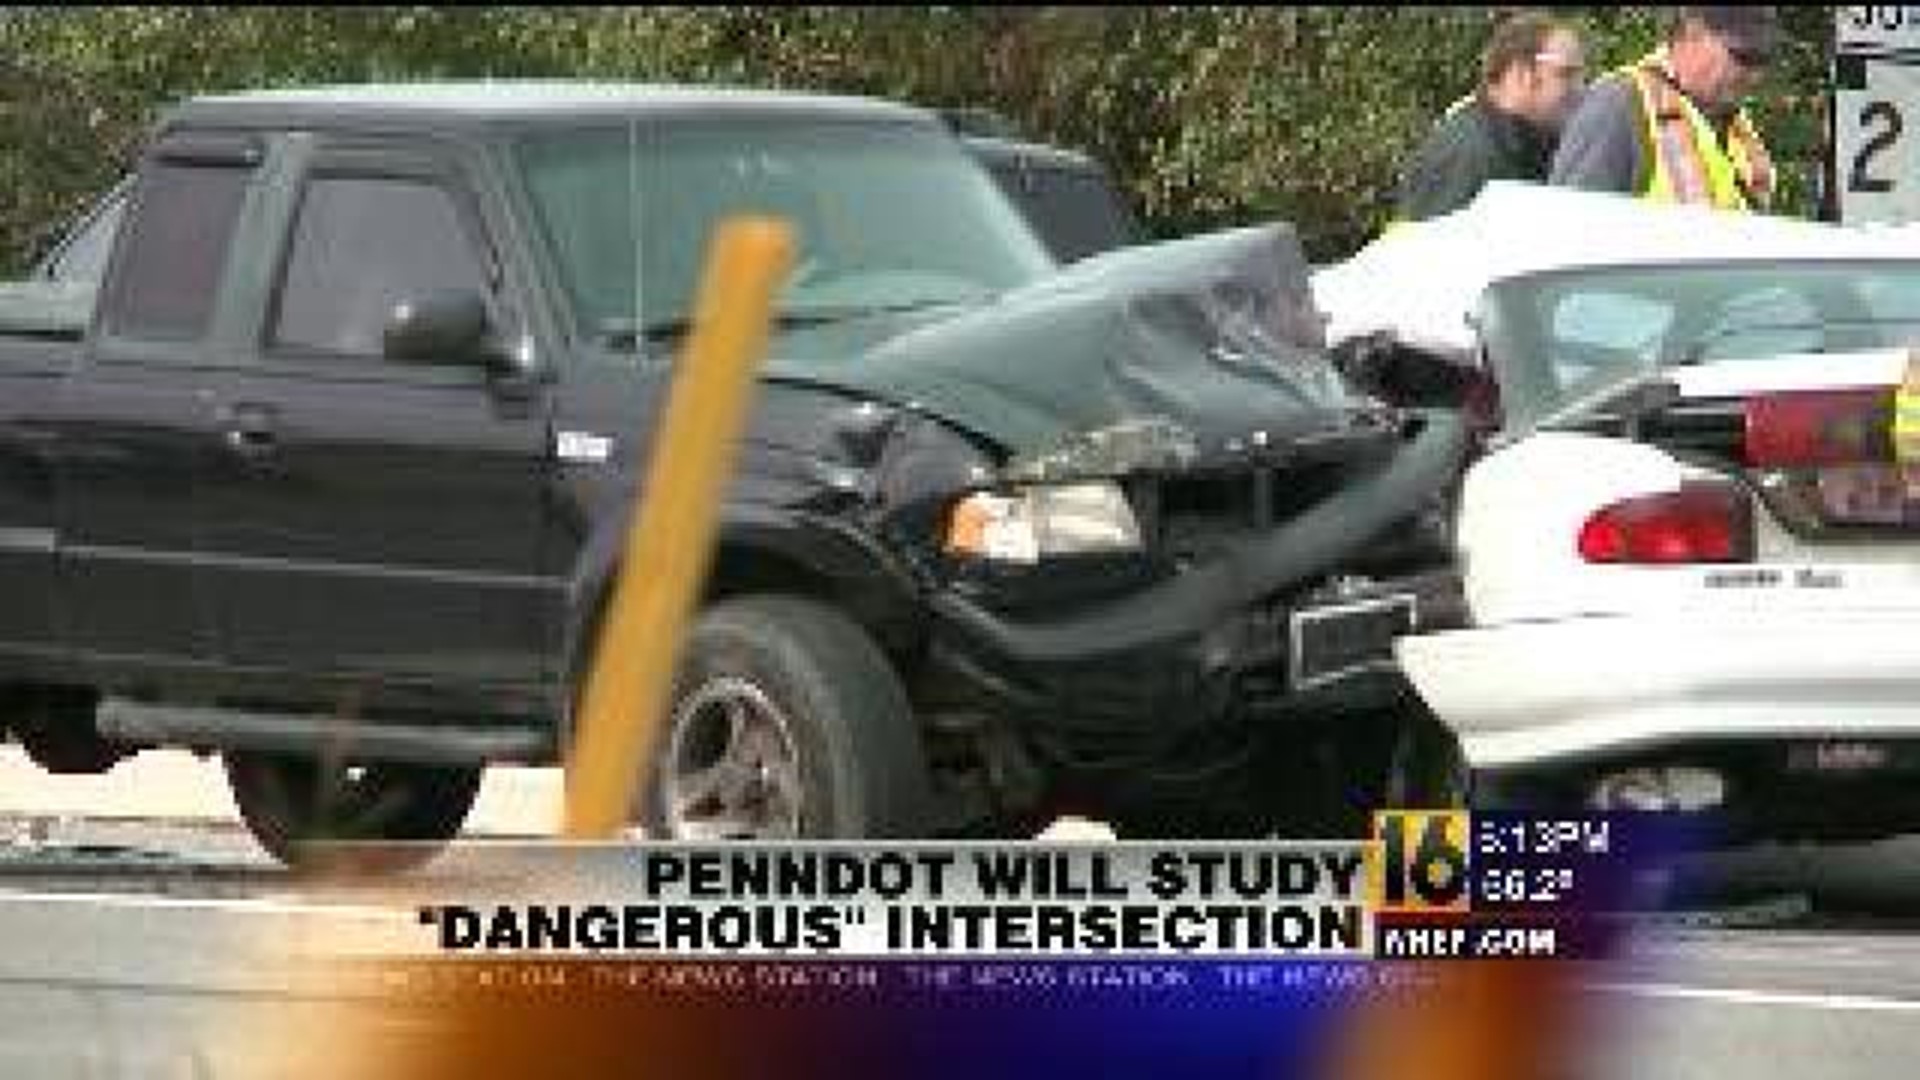 PennDOT: Engineers Will Study "Dangerous" Intersection